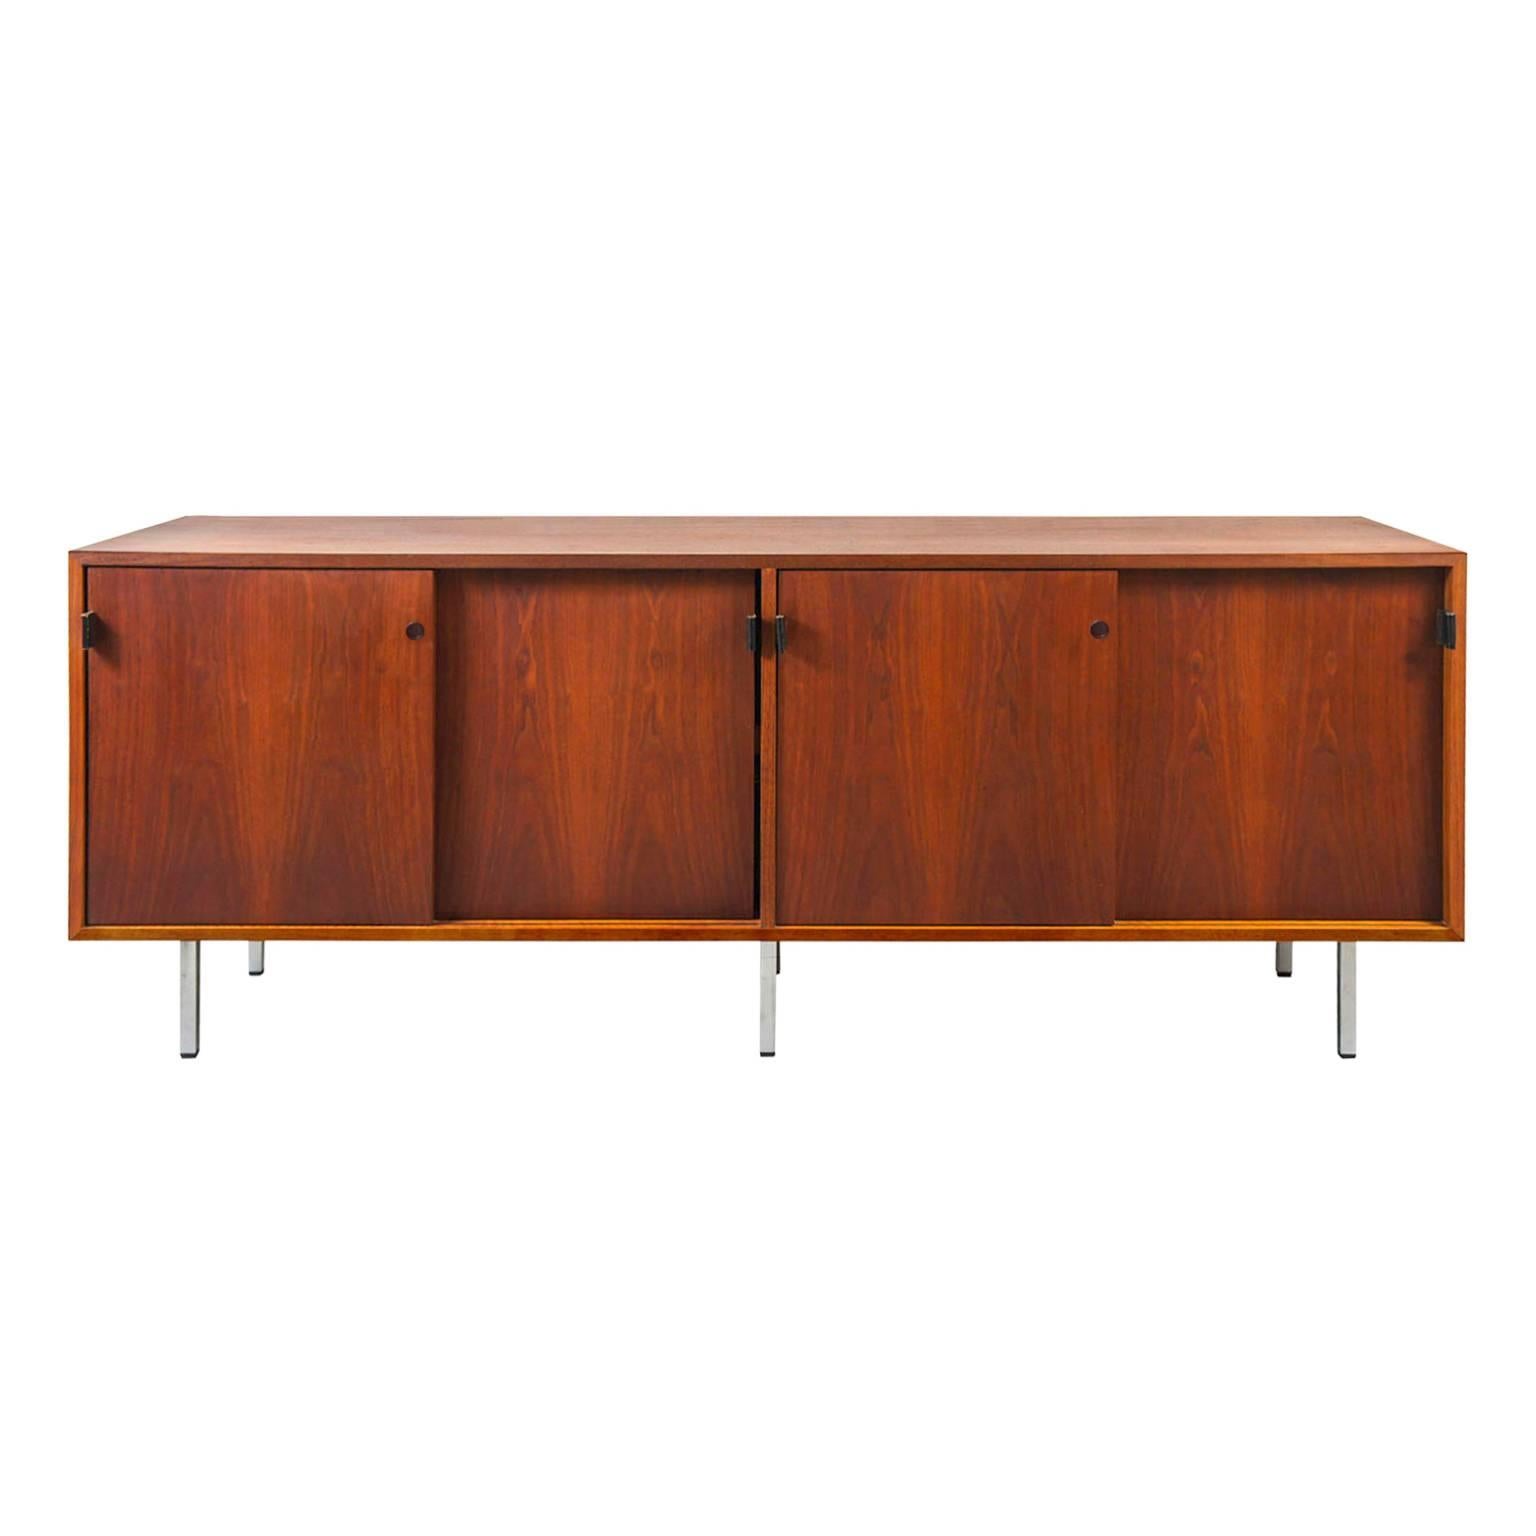 Florence Knoll Credenza in Walnut